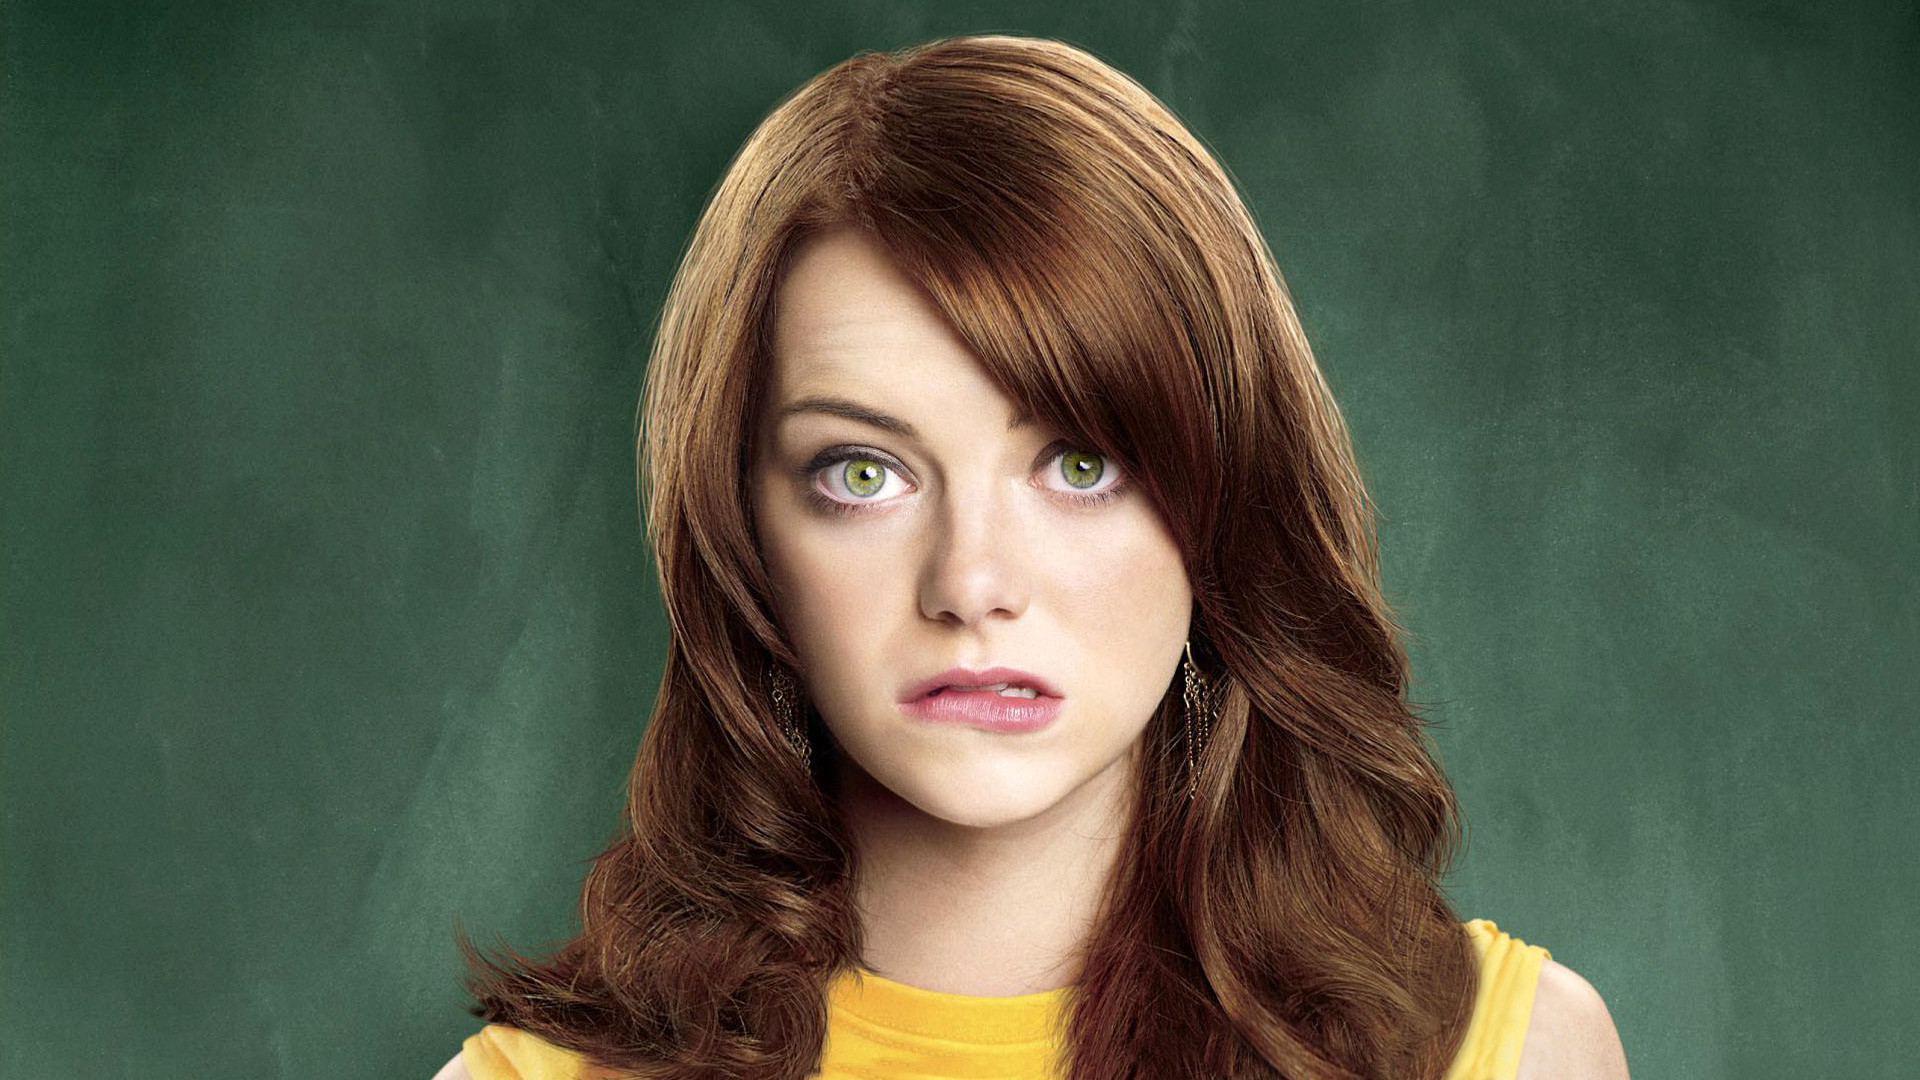 Only Hope You Like This Emma Stone Hot And Sexy Wallpaper